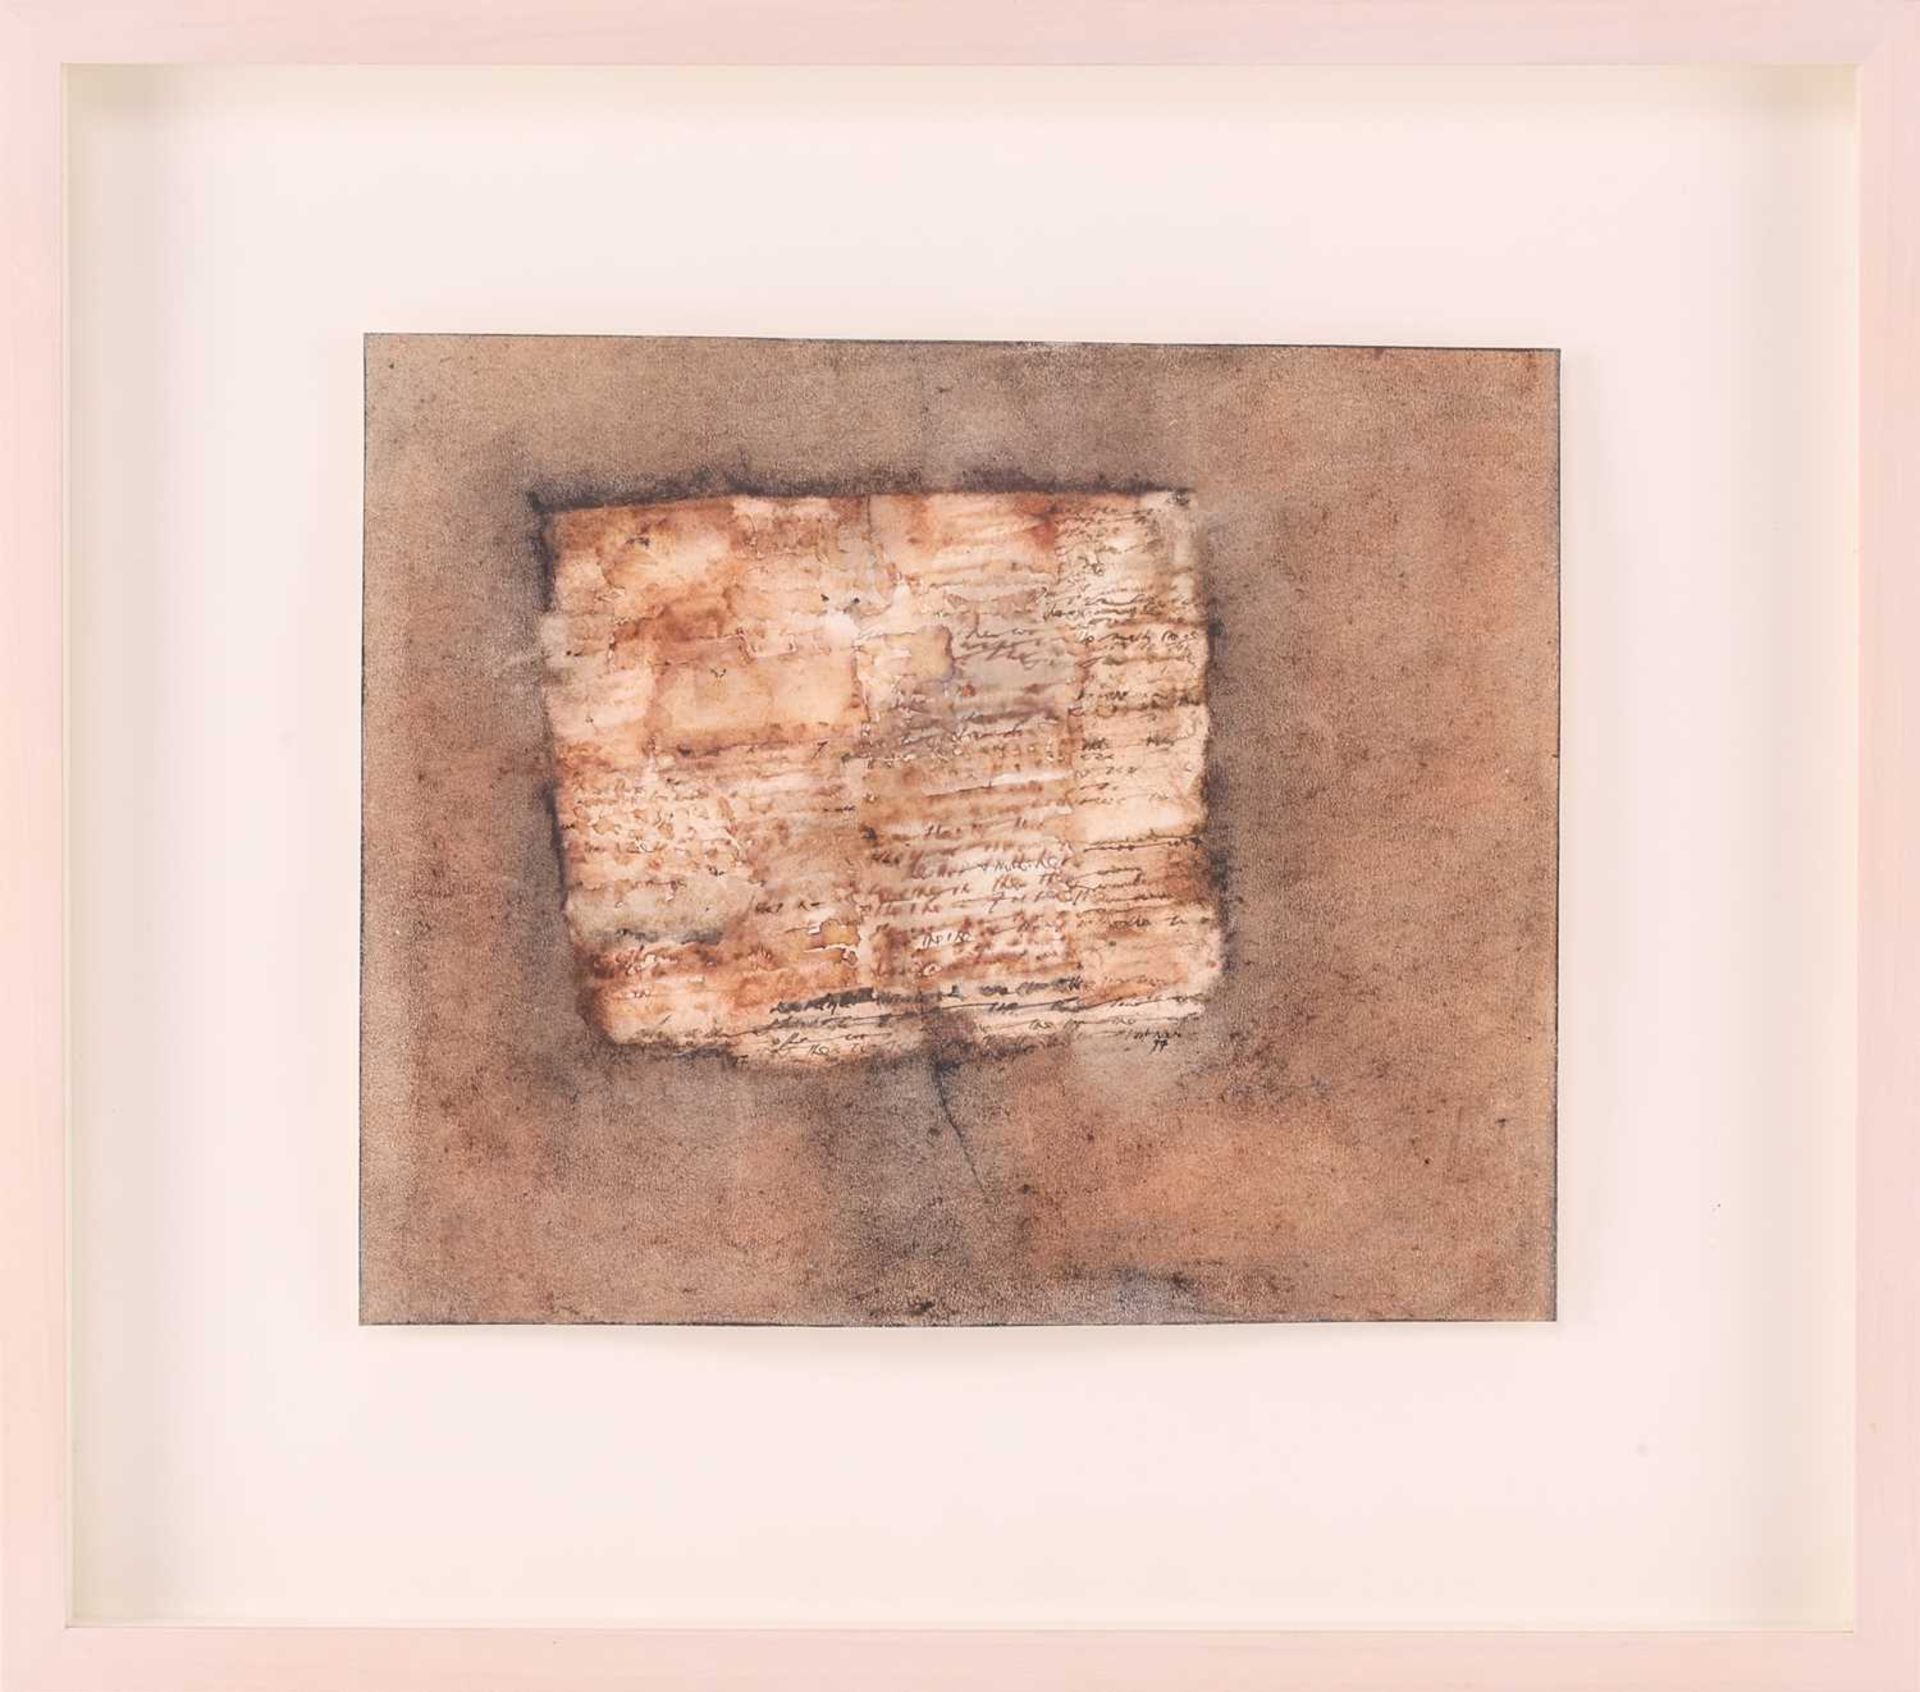 Maliheh Afnan (1935-2016) Palestinian, 'My Kite' signed and dated lower right 99', mixed media on - Image 6 of 15